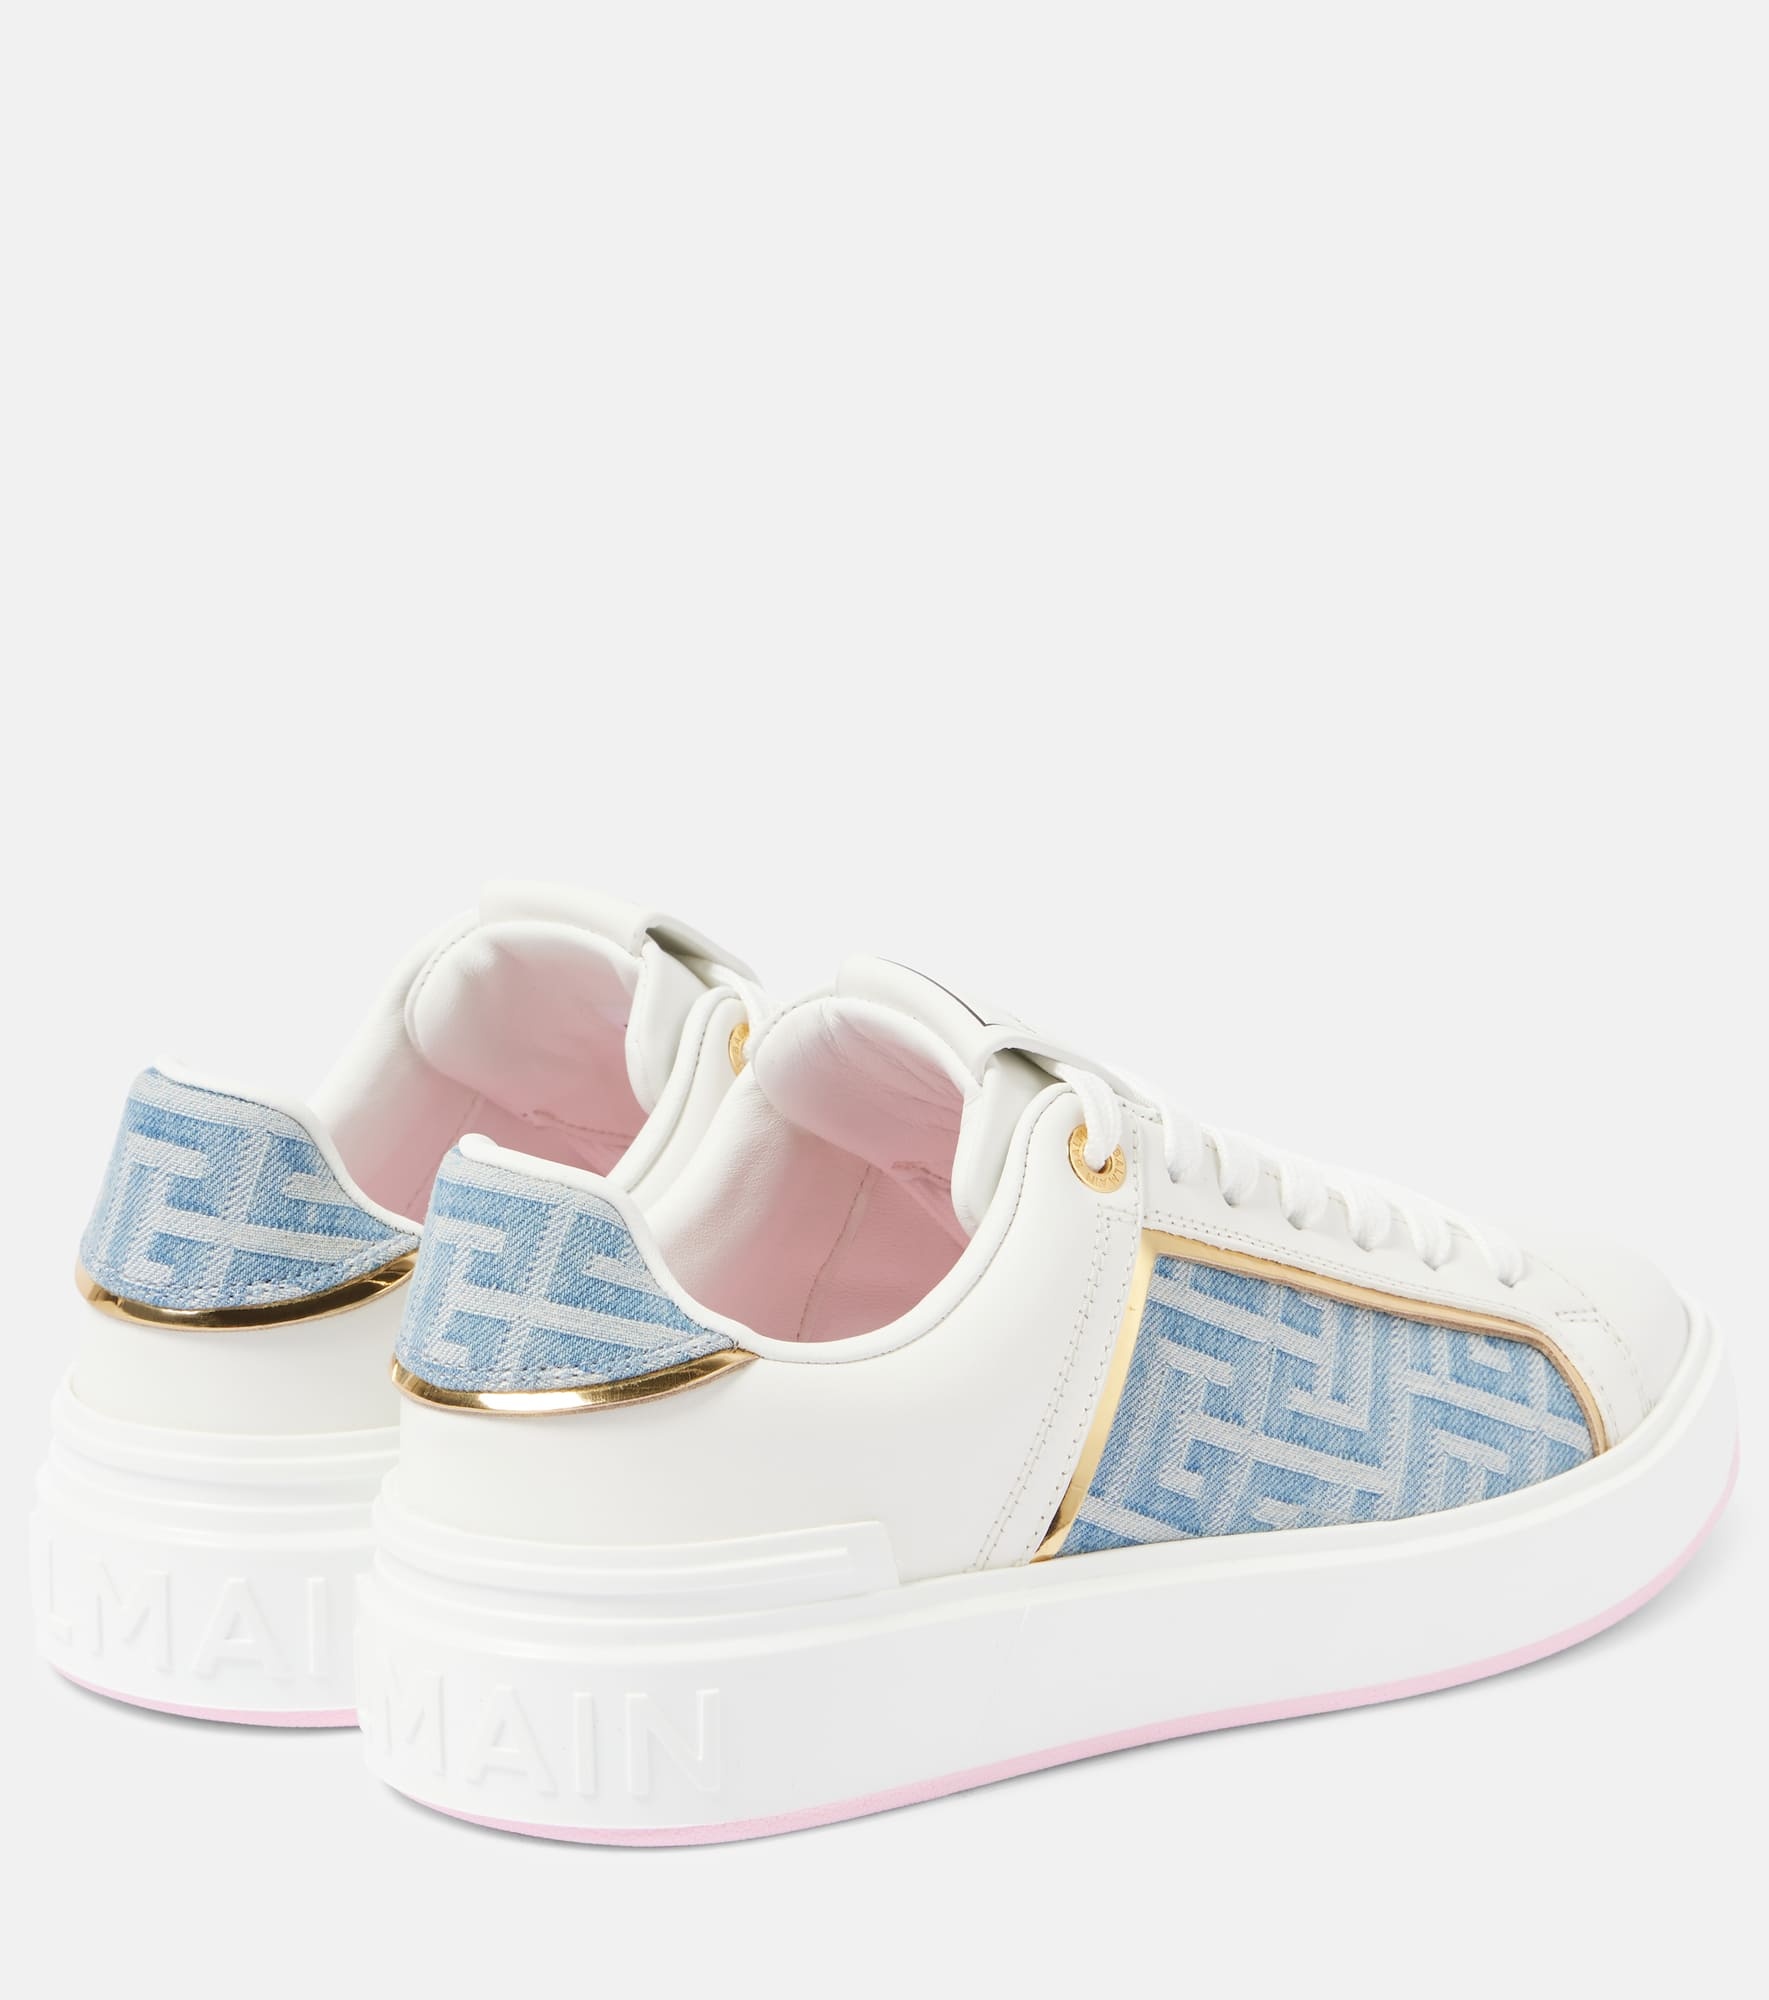 B-Court denim-trimmed leather sneakers - 3